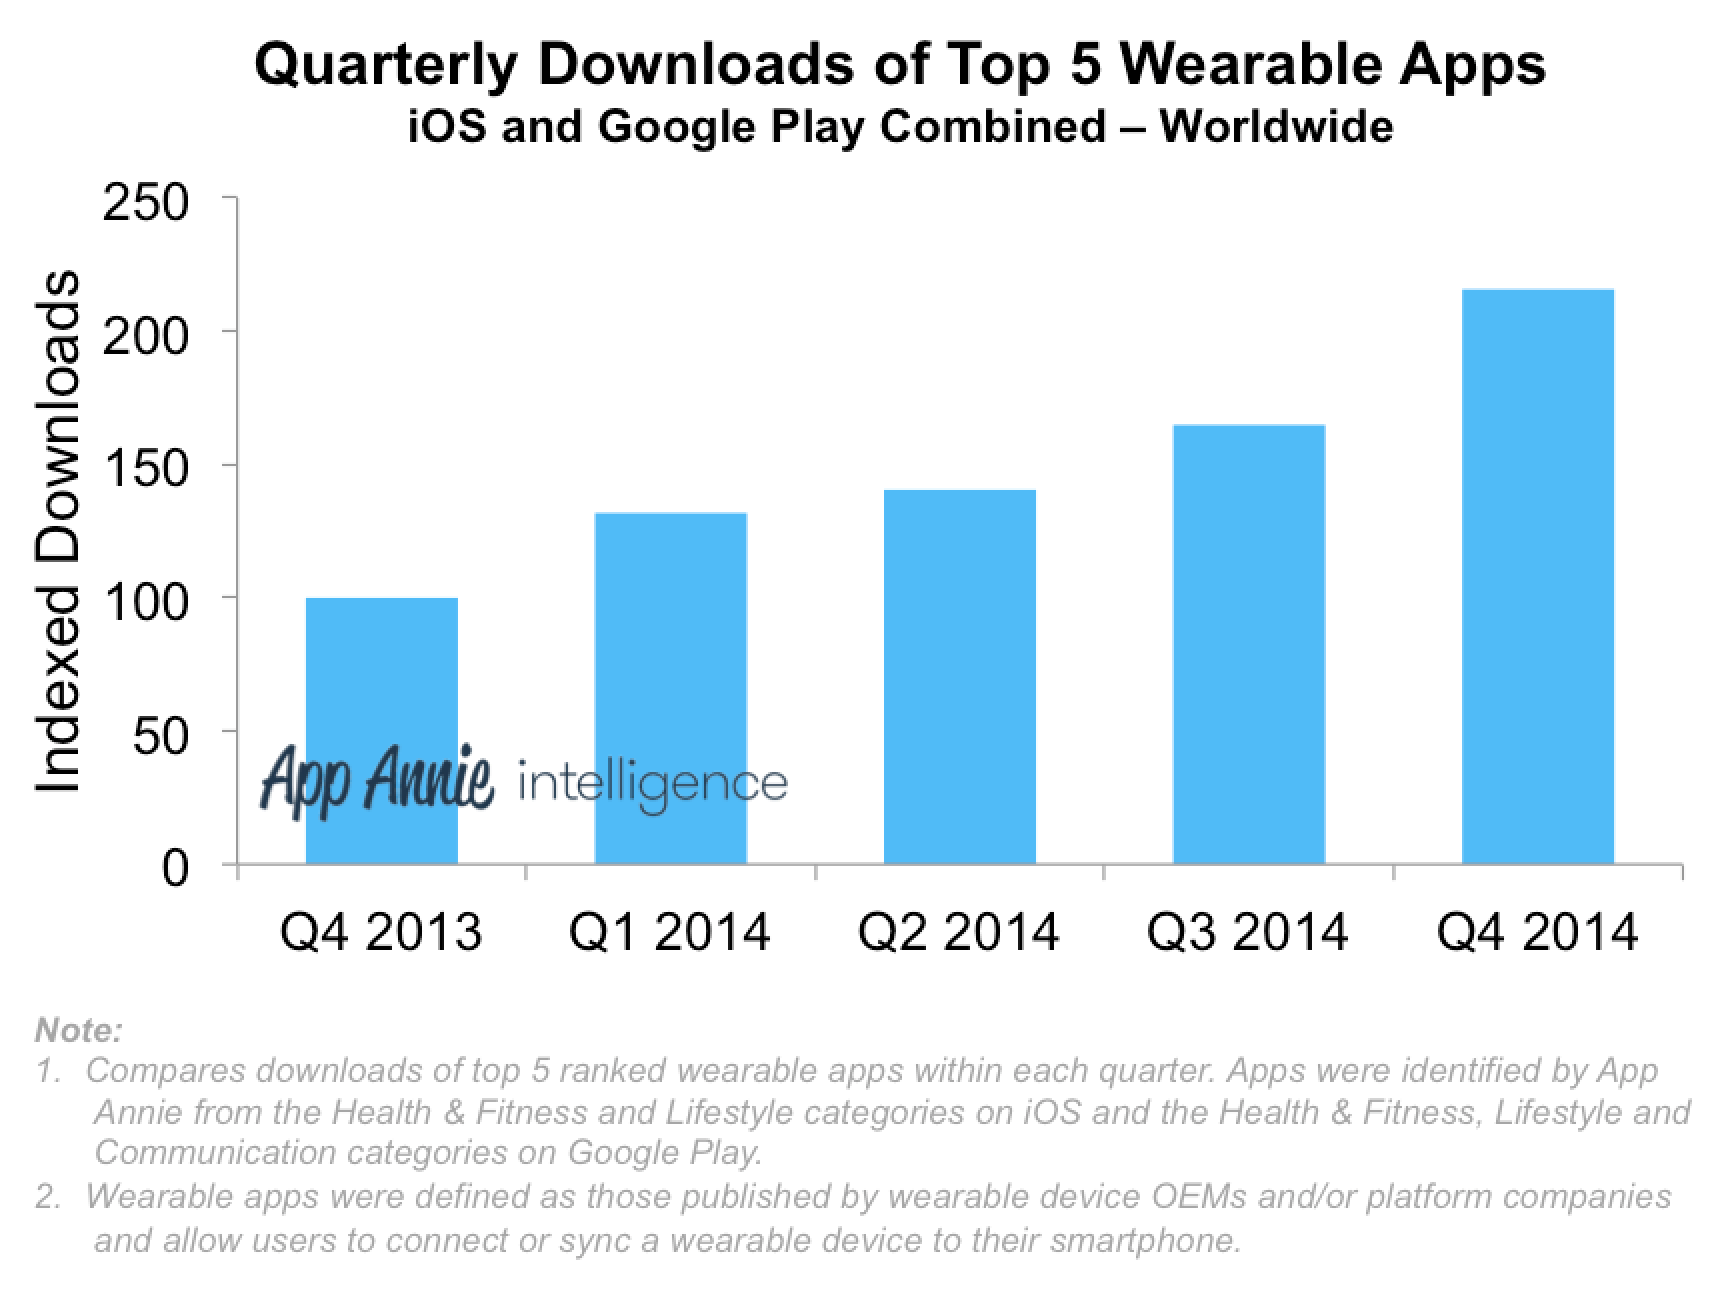 Quarterly Downloads of Top 5 Wearable Apps Q4 2013 to Q4 2014